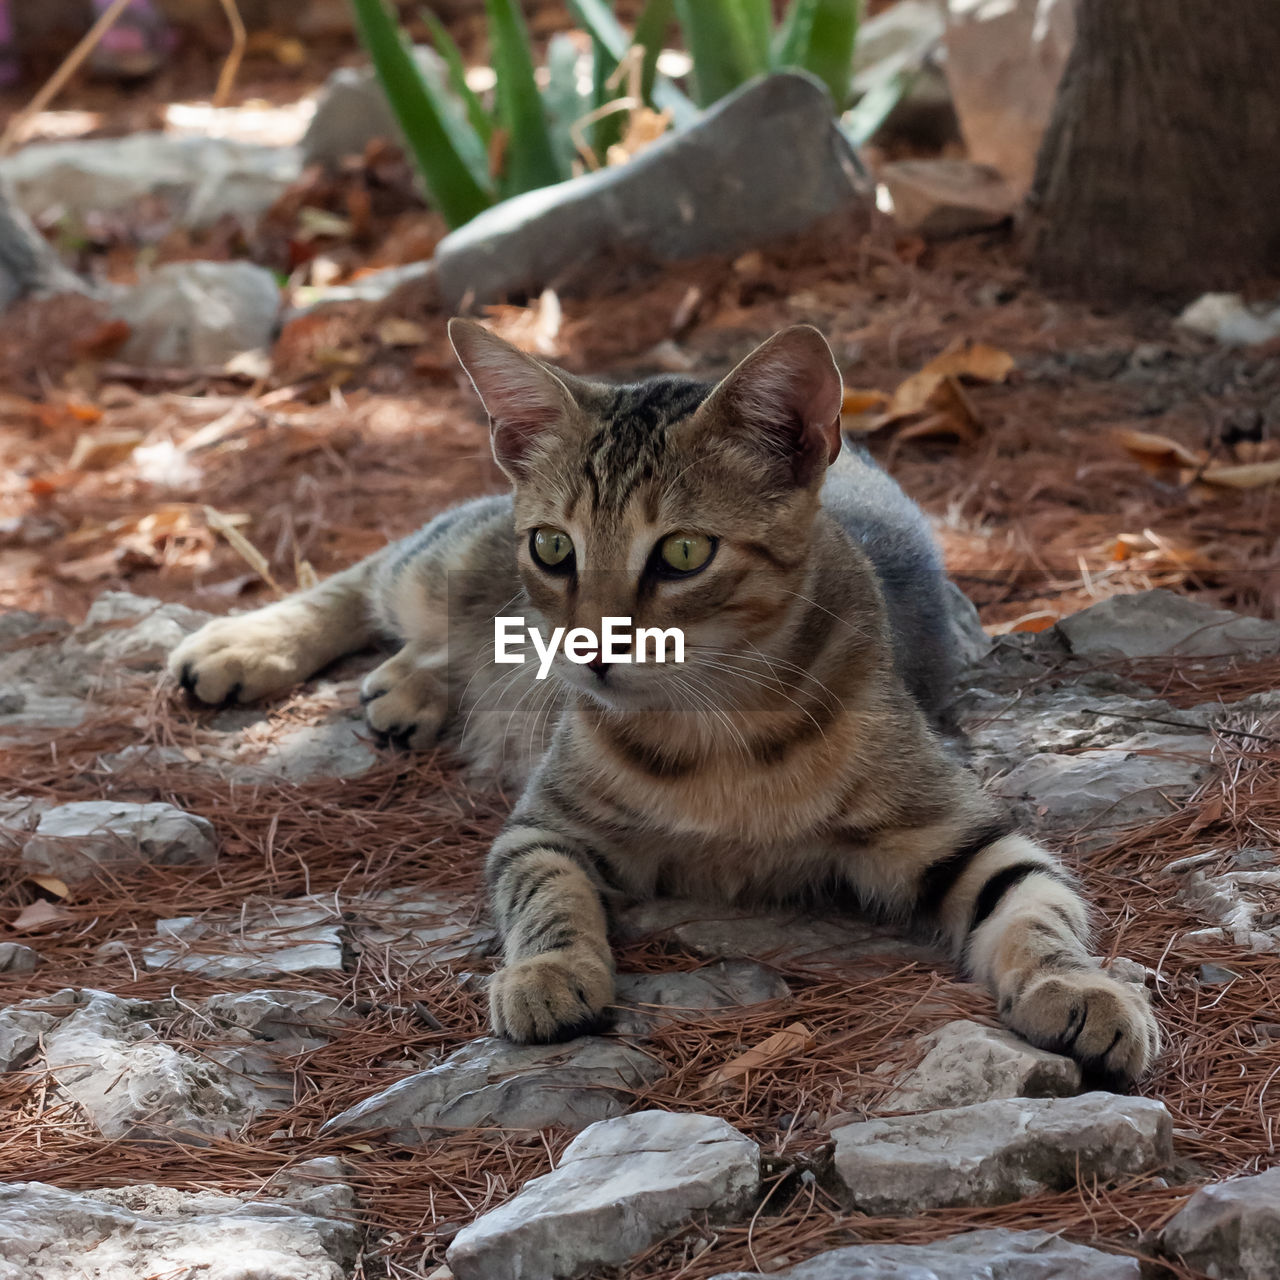 European or celtic brown cat with green eyes lying on gray stones and dried pine needles.